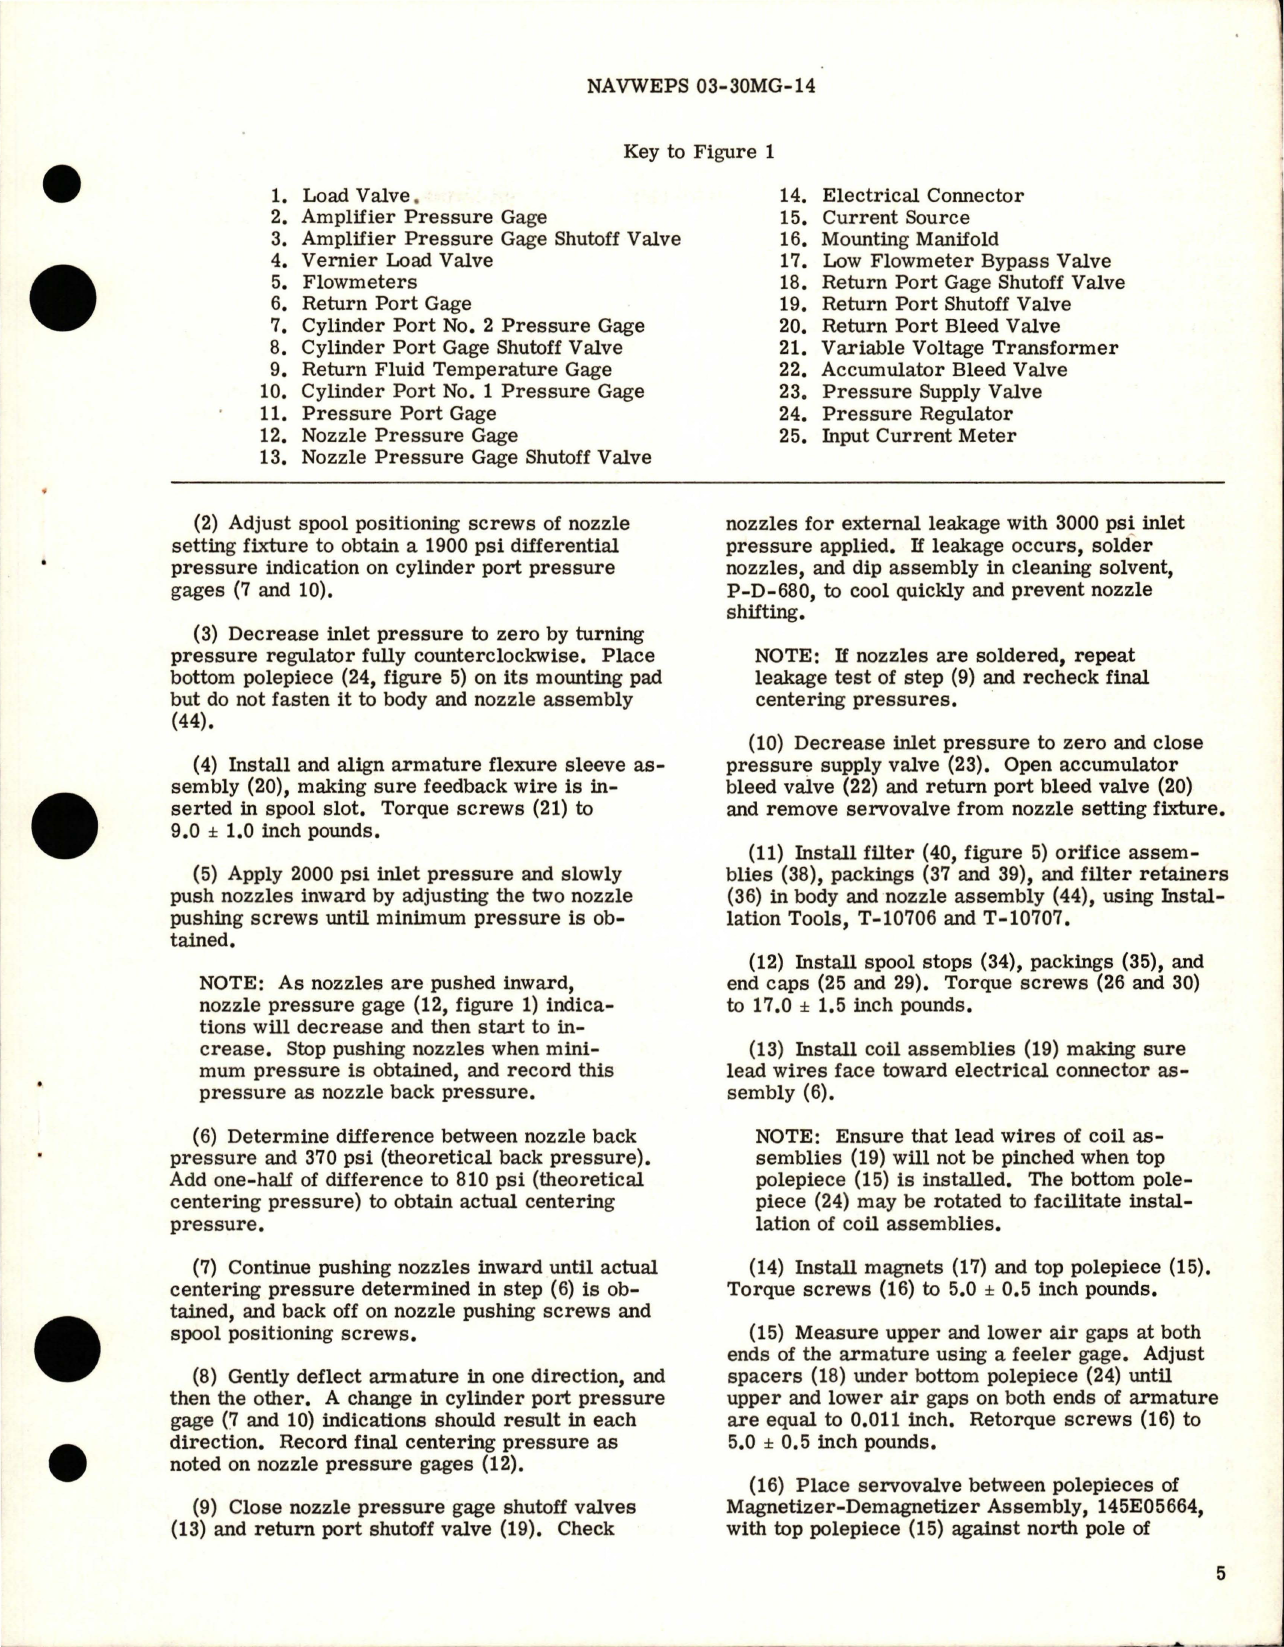 Sample page 7 from AirCorps Library document: Overhaul Instructions with Illustrated Parts Breakdown for Servovalve - Model 31-256 - Part 010-28427 